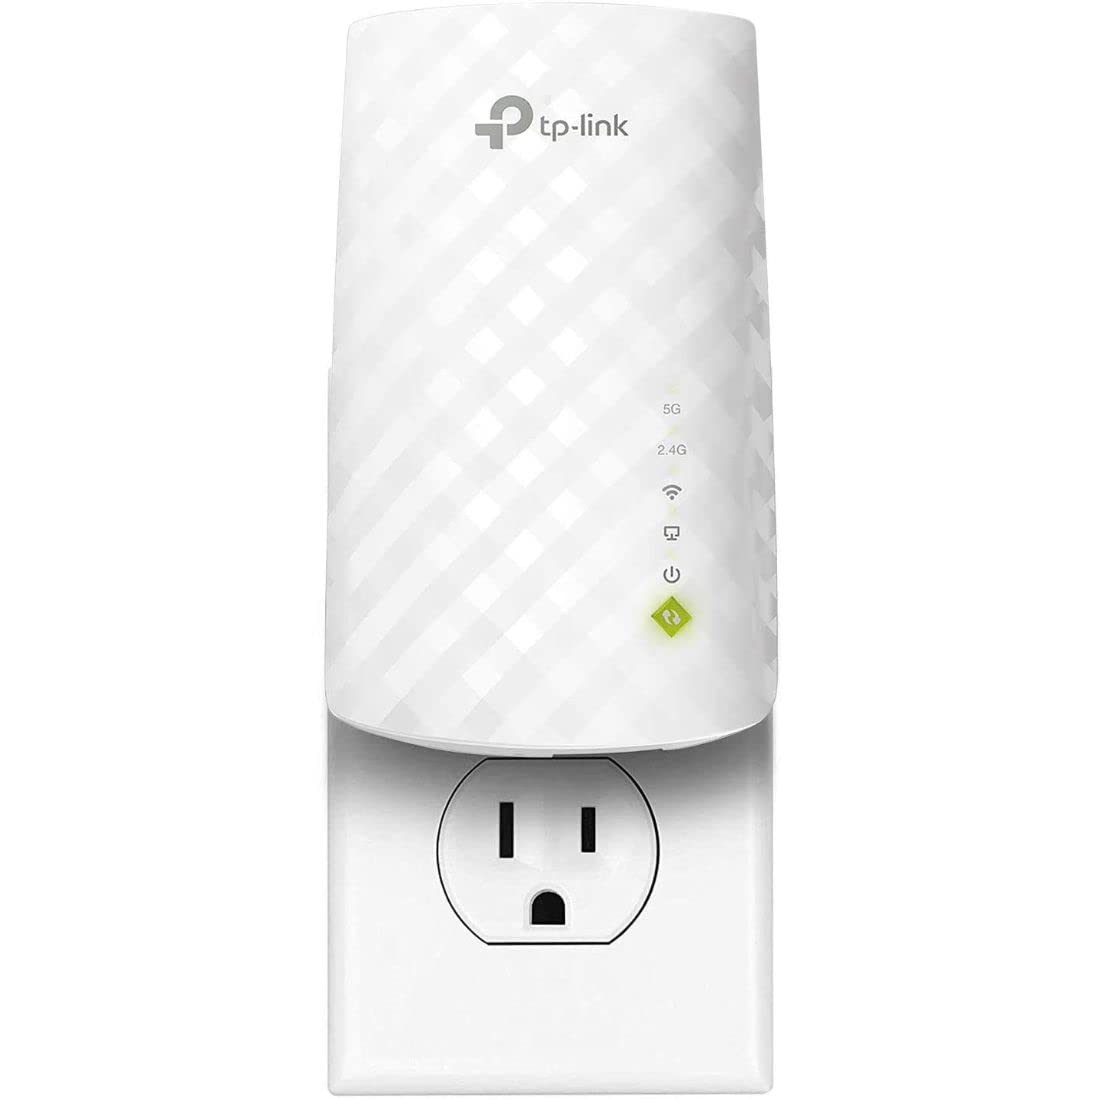 TP-Link WiFi Extender with Ethernet Port, Dual Band 5GHz/2.4GHz $16.96 or $13.96 A/C